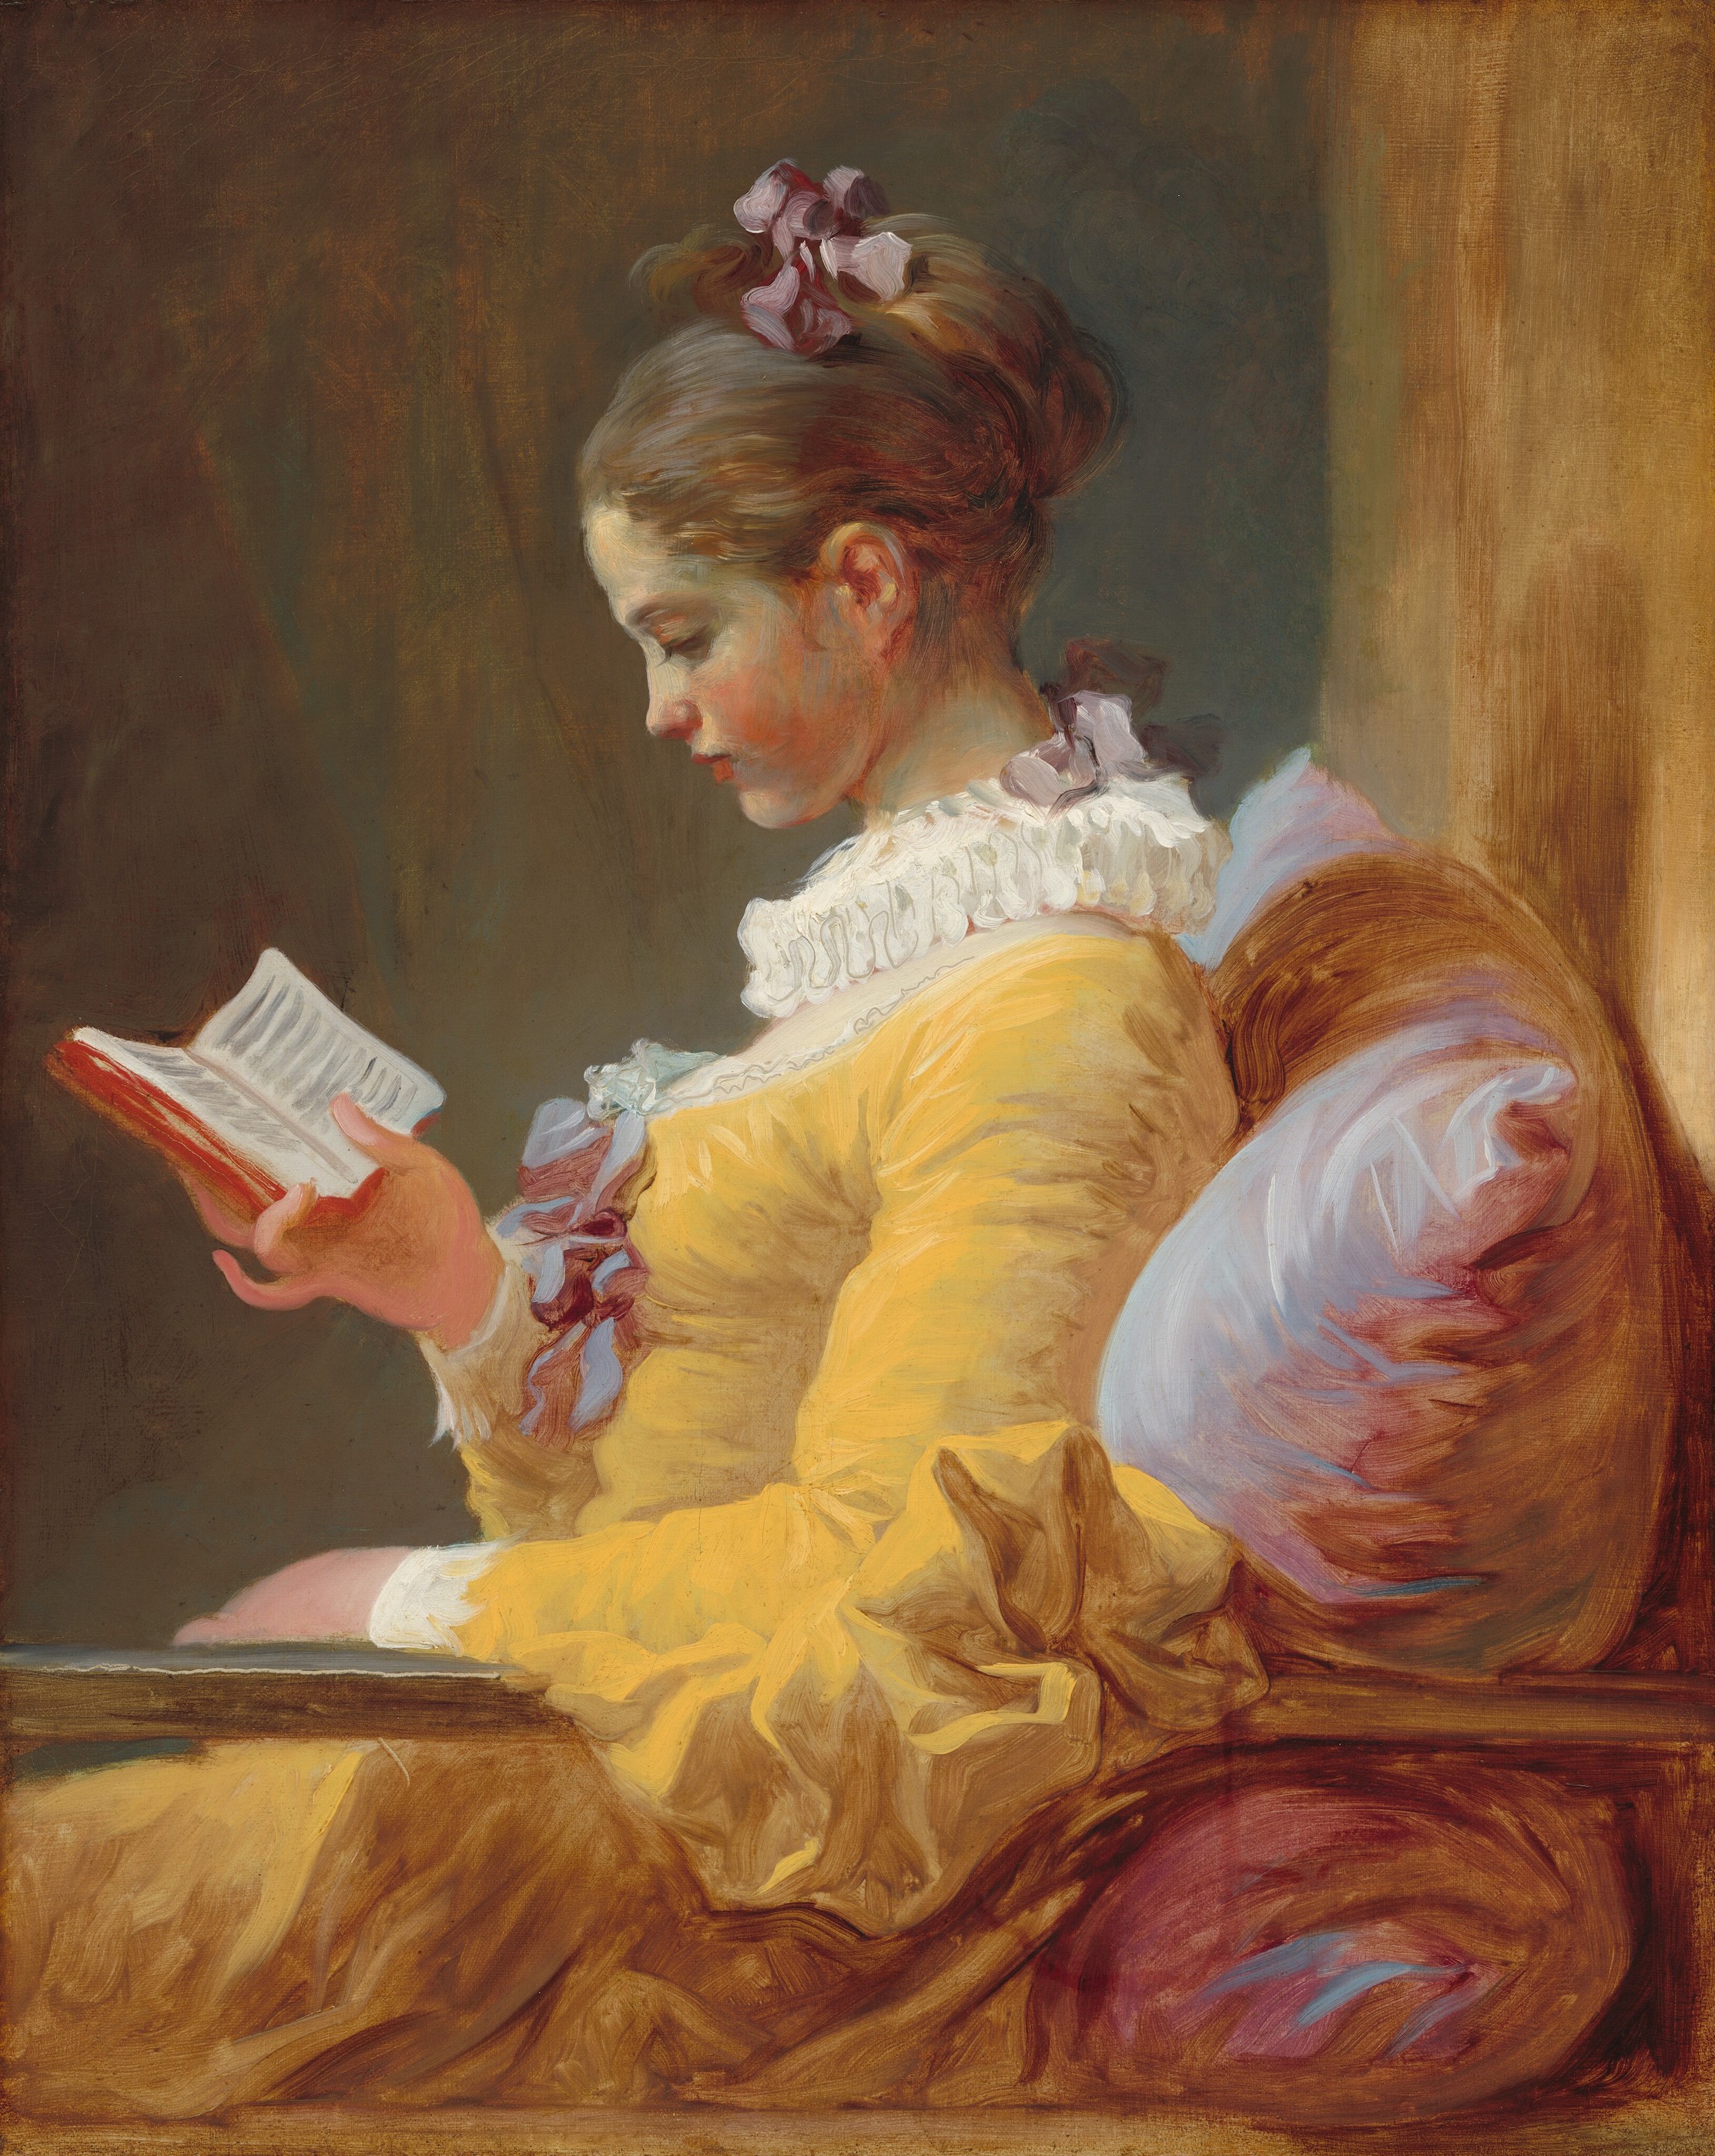 Young Girl Reading by Jean-Honoré Fragonard - c. 1769 - 81.1 x 64.8 cm National Gallery of Art